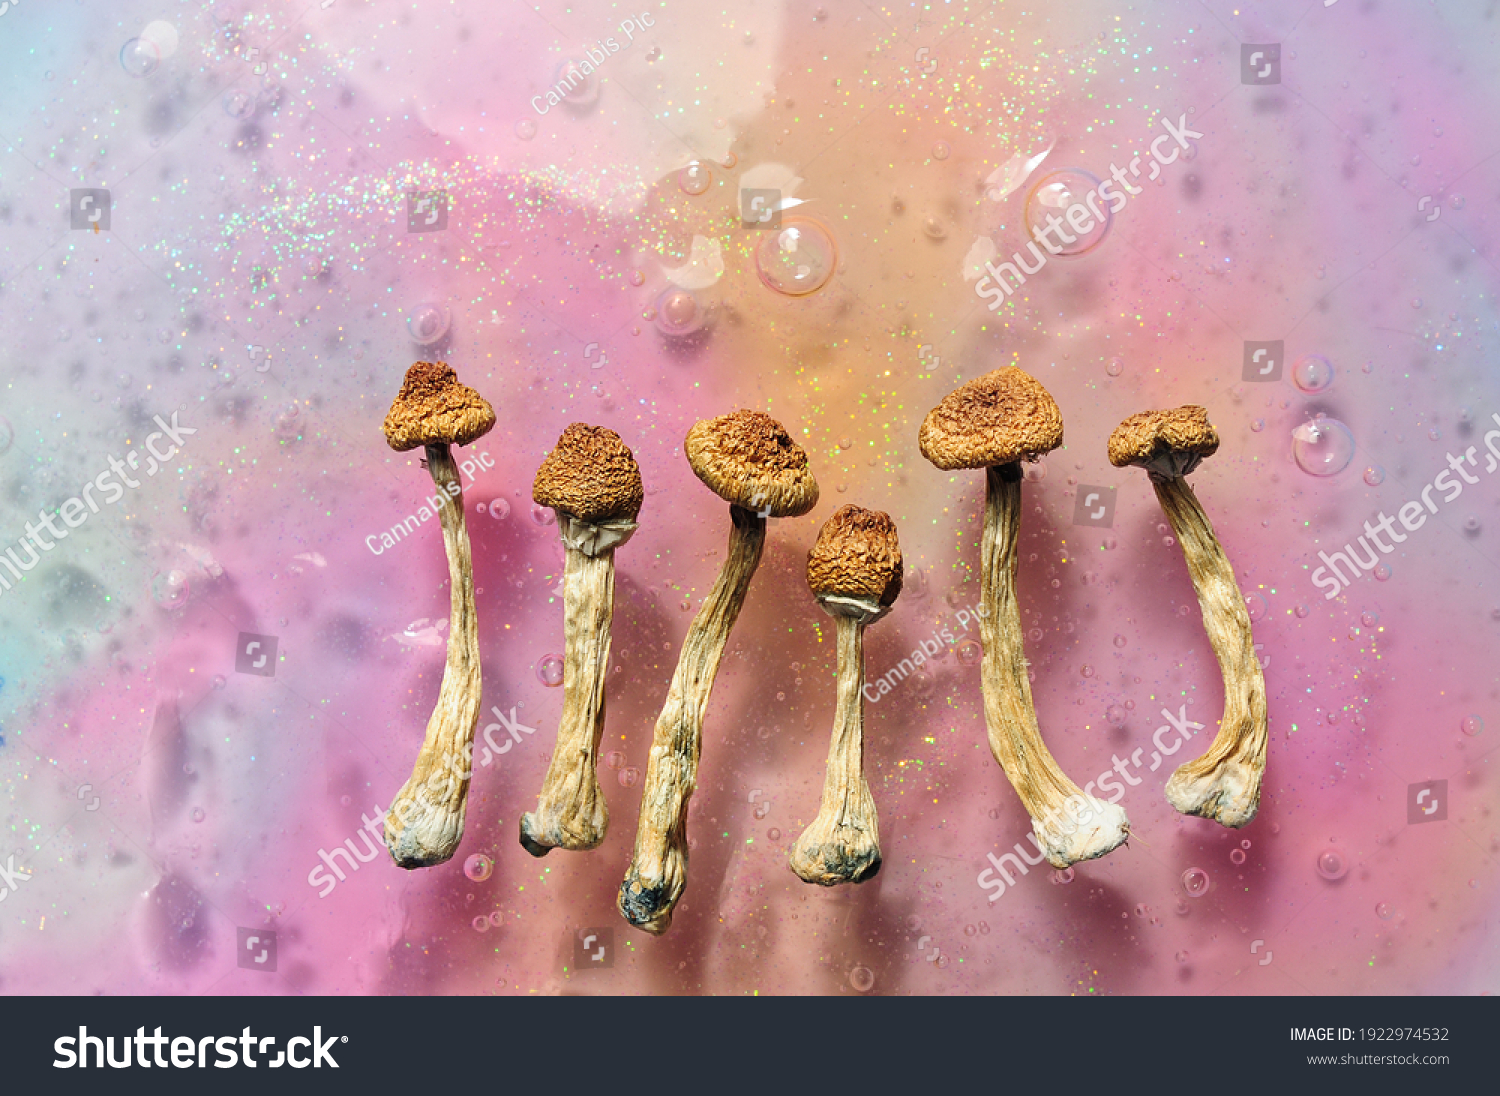 Psilocybin mushrooms on pink bright colorful background. Psychedelic magic mushrooms Golden Teacher. Cosmic consciousness. Microdosing concept. #1922974532